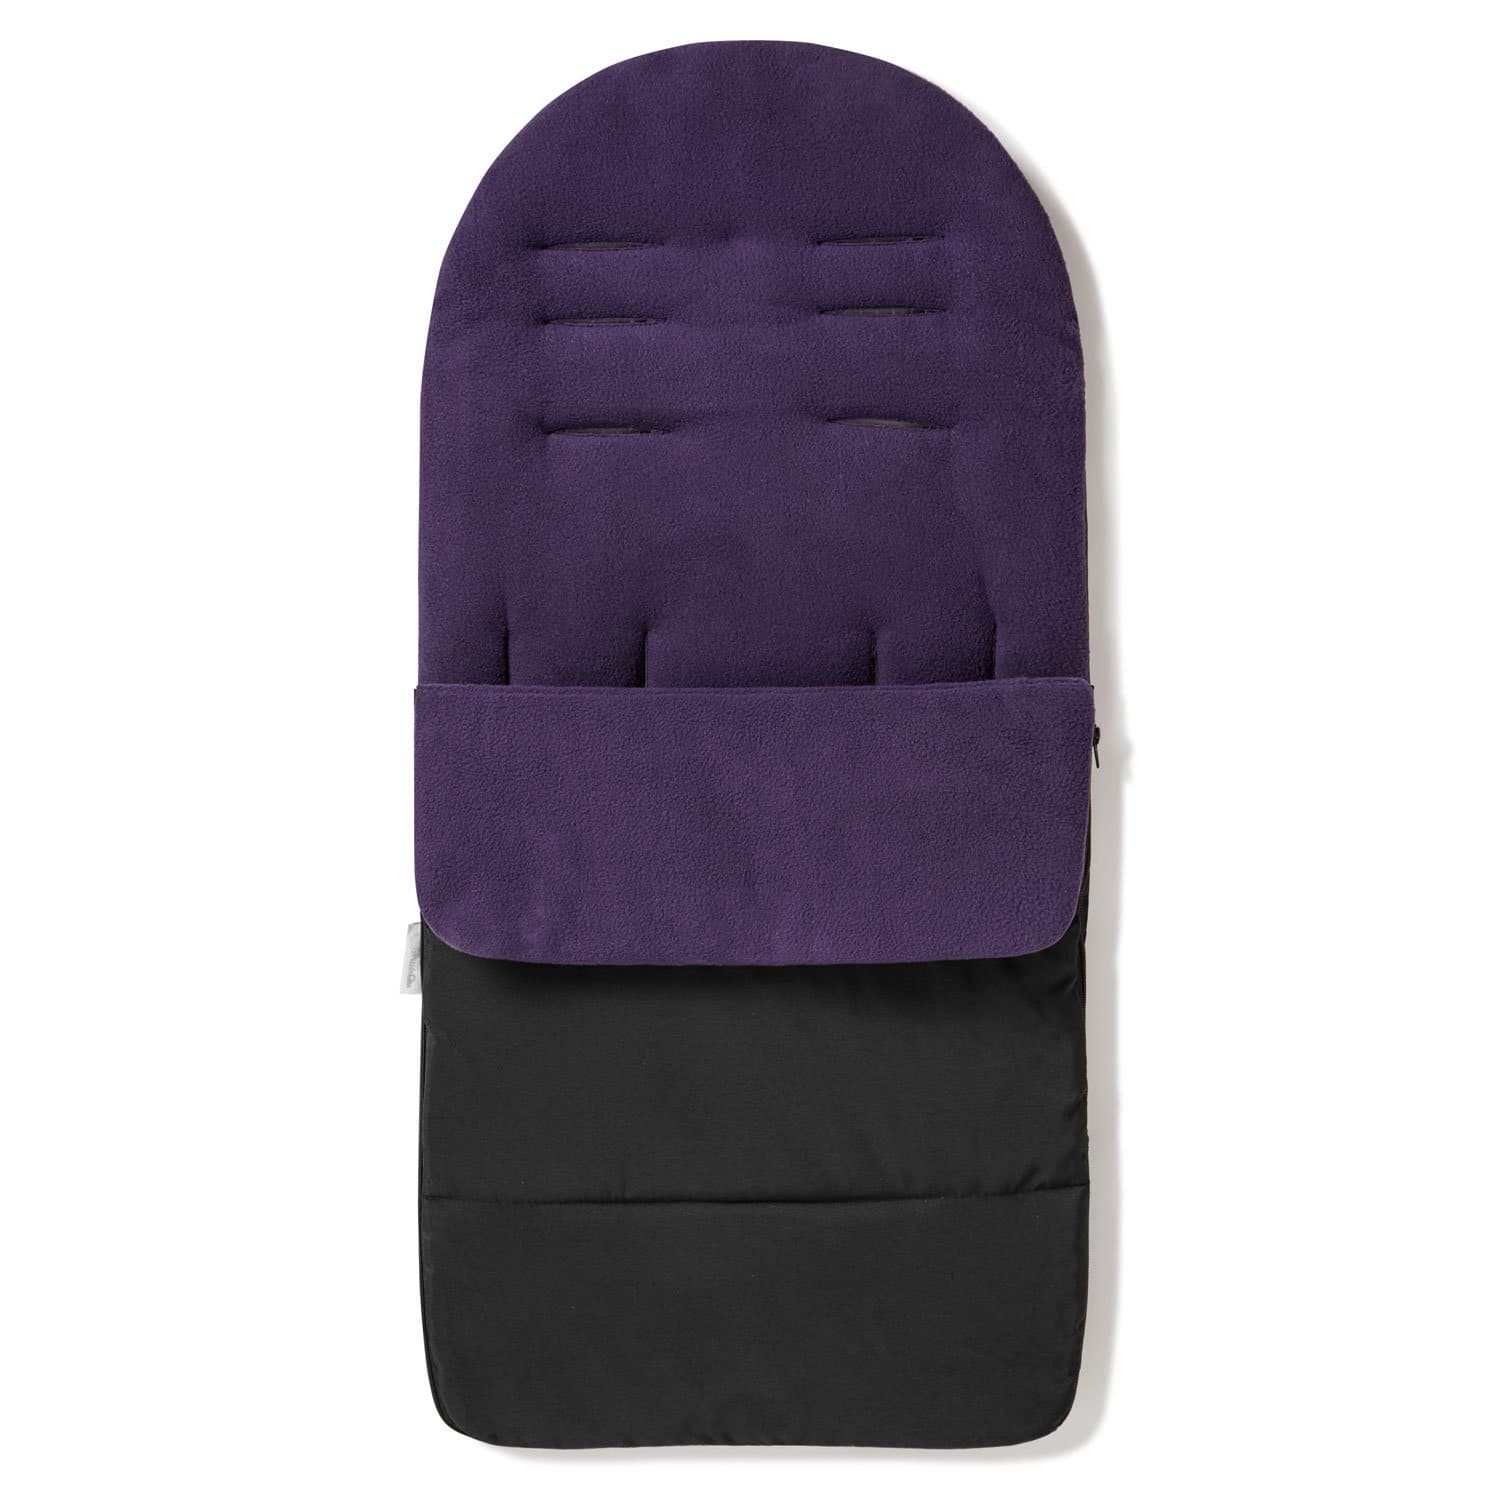 Premium Footmuff / Cosy Toes Compatible with Red Kite - Plum Purple / Fits All Models | For Your Little One